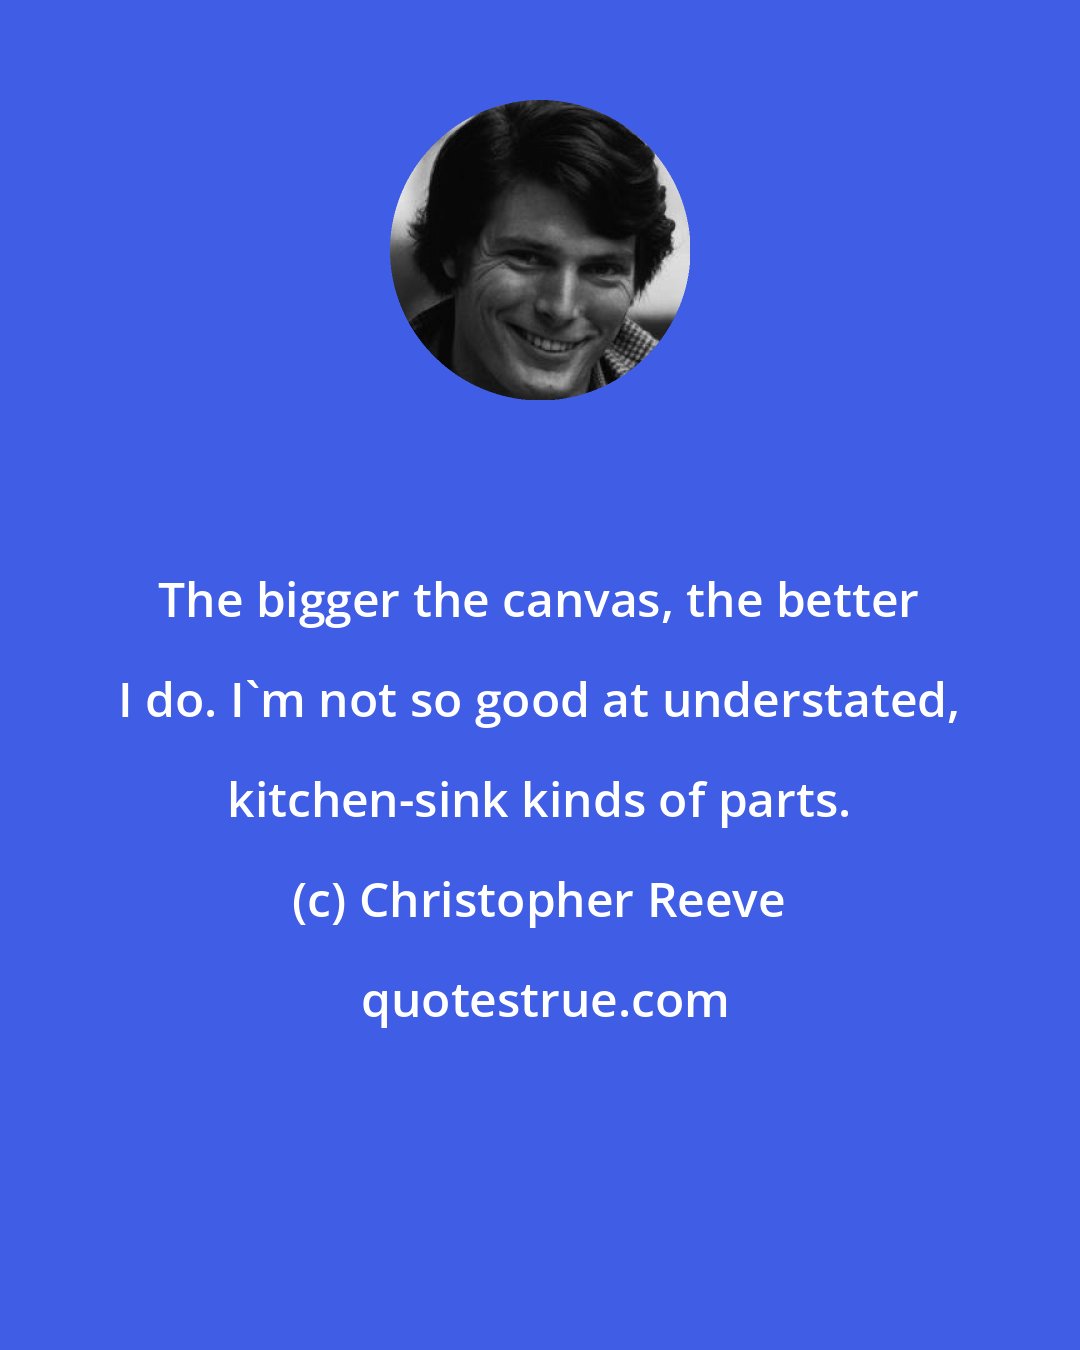 Christopher Reeve: The bigger the canvas, the better I do. I'm not so good at understated, kitchen-sink kinds of parts.